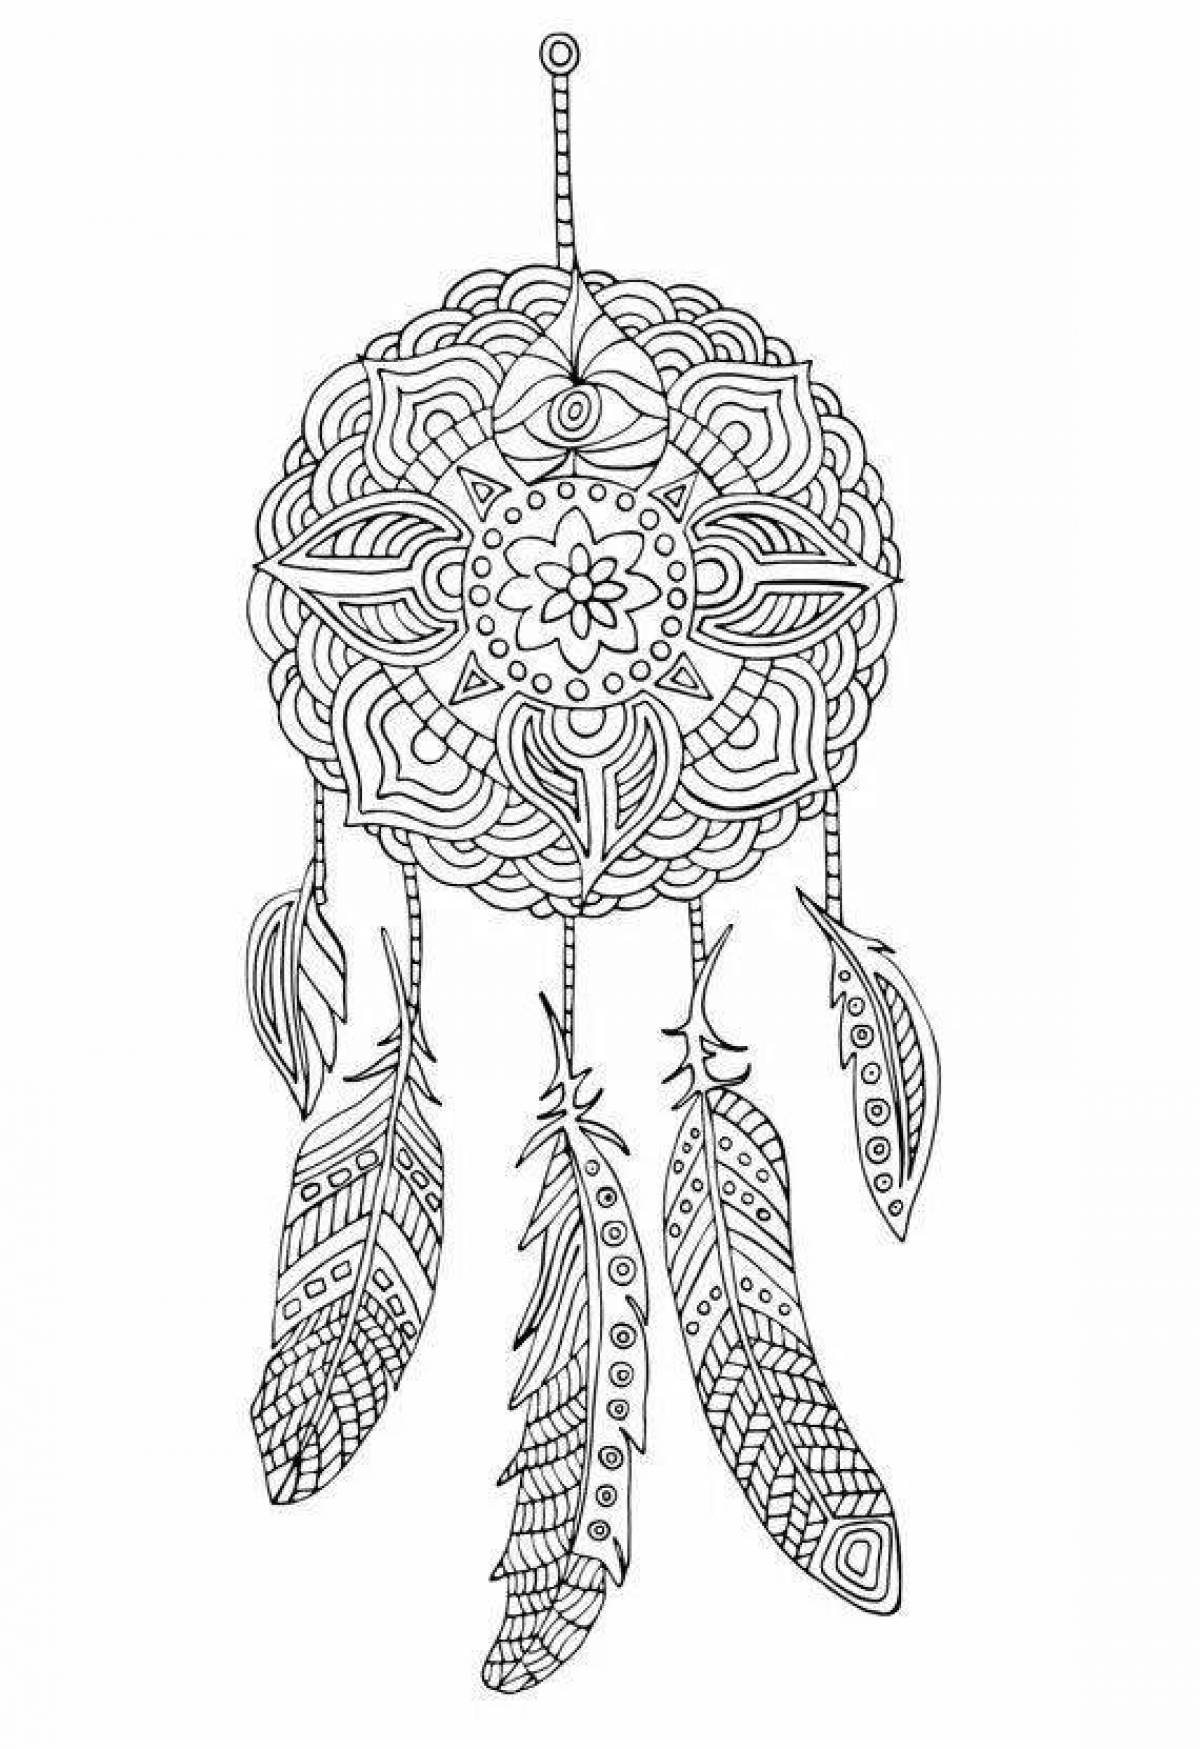 Bright dreamcatcher coloring page